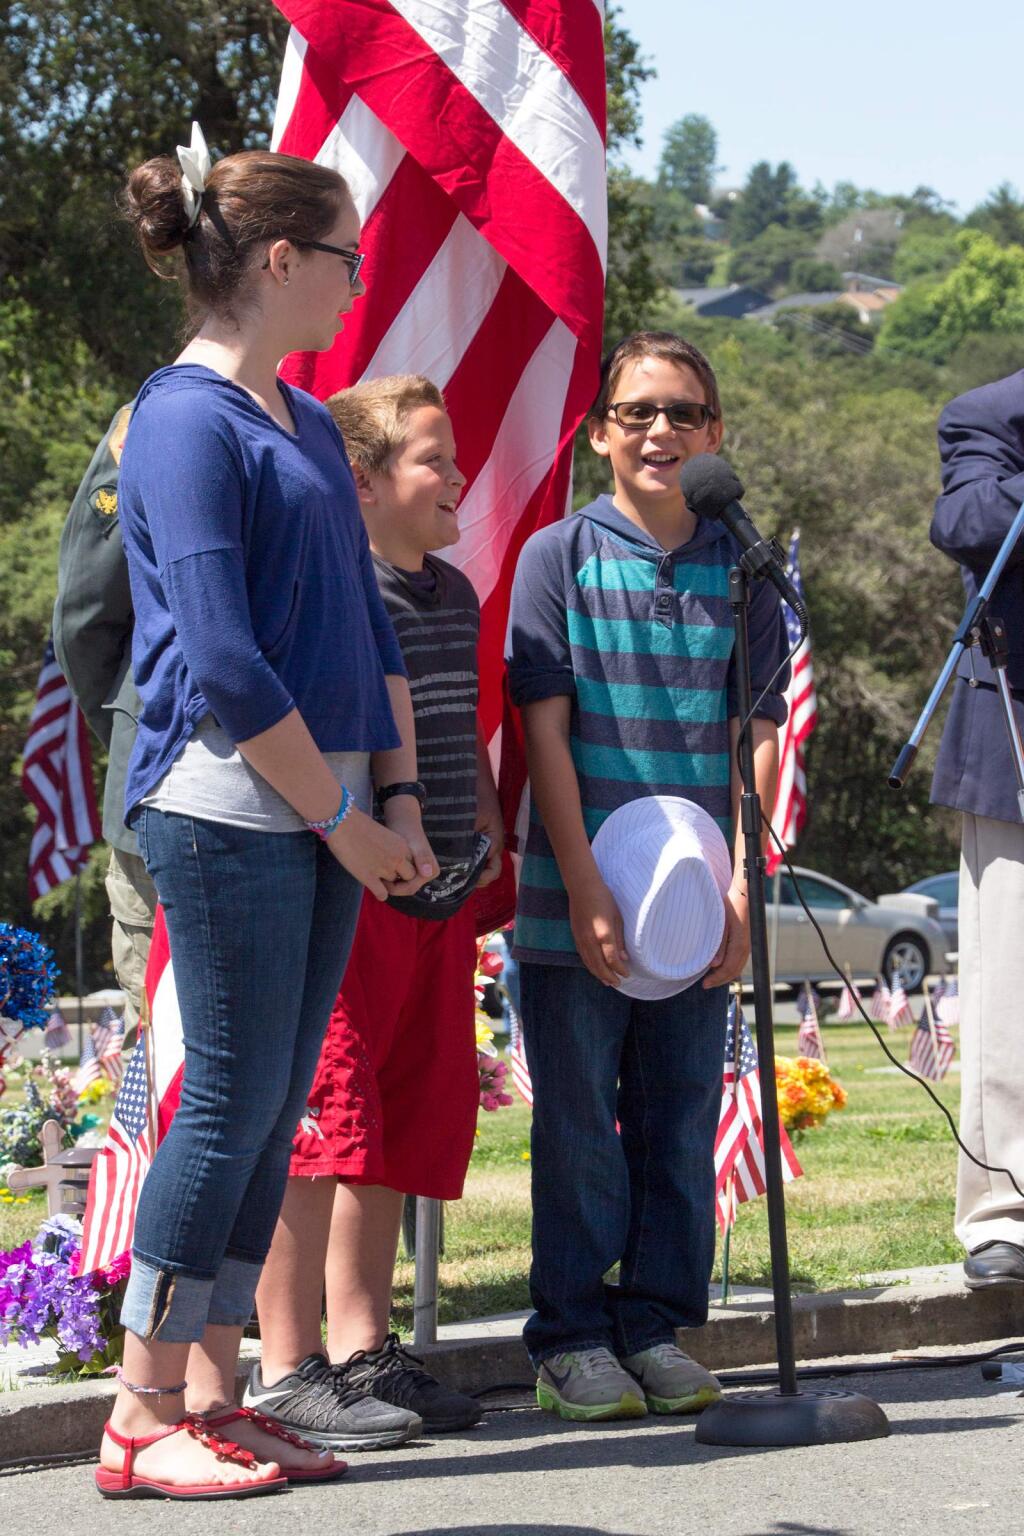 Students from Liberty Elementary School sing 'The Star Spangled Banner' at Petaluma's annual Memorial Day event, honoring all veterans, at Cypress Hill Memorial Park in Petaluma on the morning of Memorial Day on Monday May 30, 2016. (ASHLEY COLLINGWOOD/FOR THE ARGUS-COURIER)